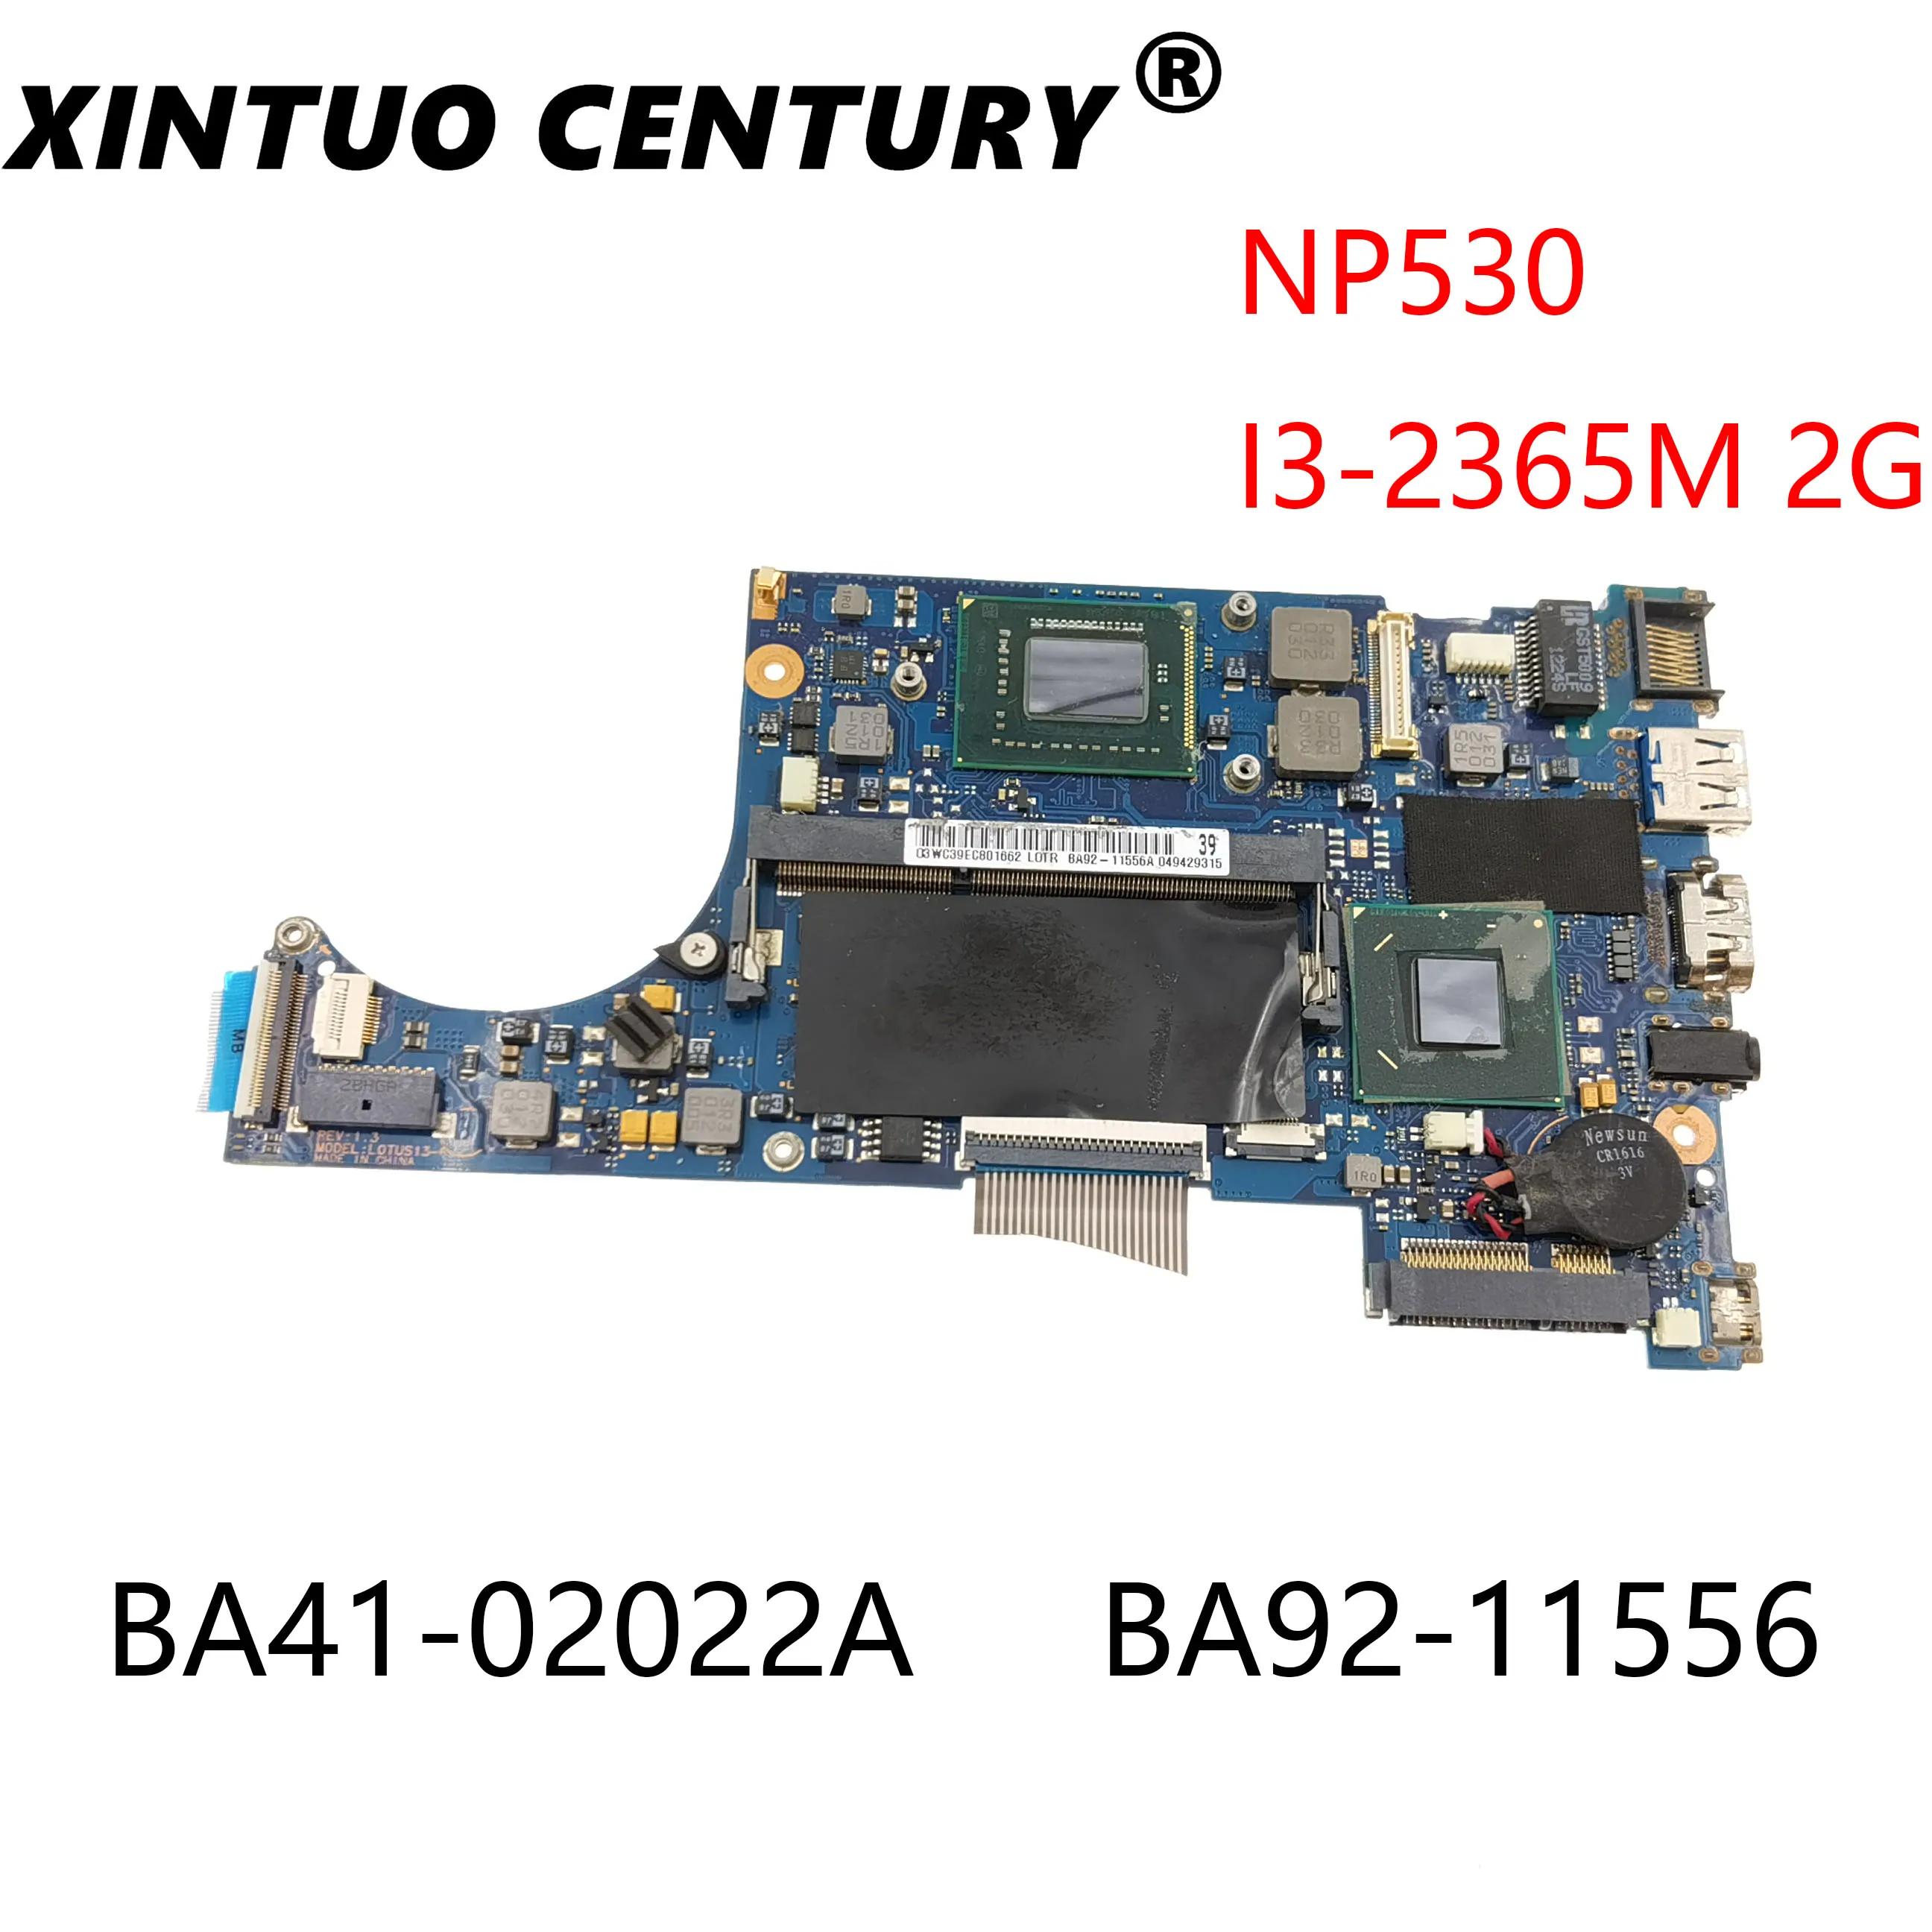 

BA41-02022A BA92-11556 is applicable to NP530 Samsung notebook computer, and I3-2365M 2G SR0U3 CPU passes the test